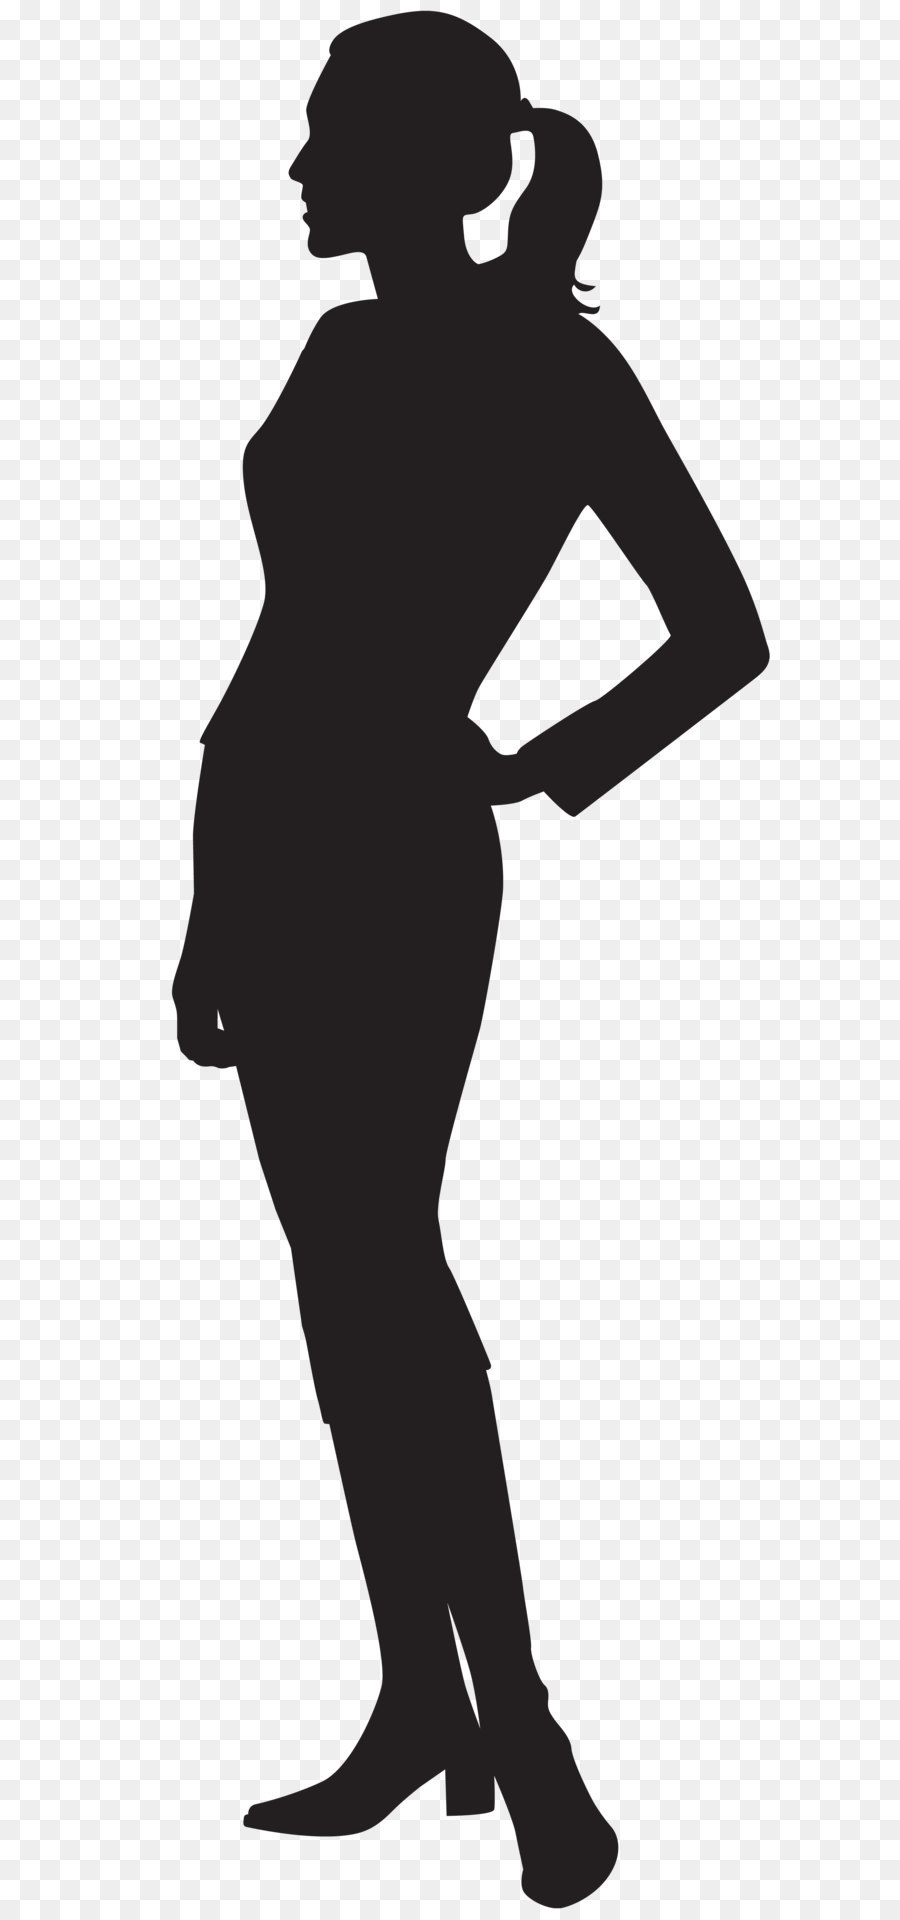 Silhouette Clip art - Female Silhouette Clip Art PNG Image png download - 2716*8000 - Free Transparent Silhouette png Download.